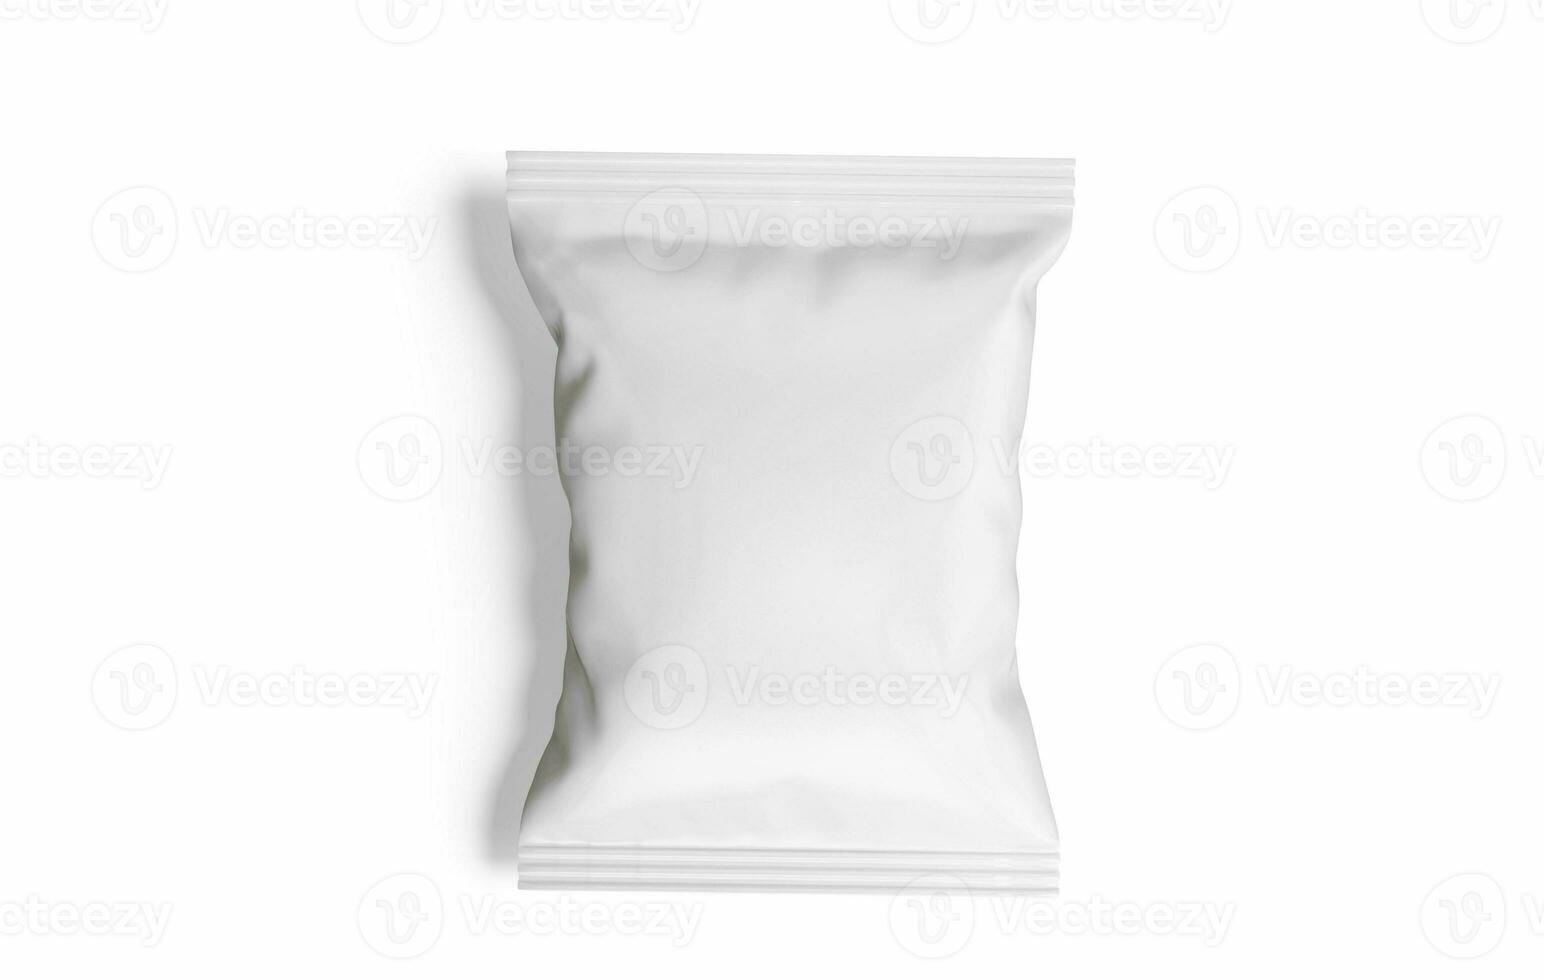 Potato chips packaging white color and rendered with 3D software photo